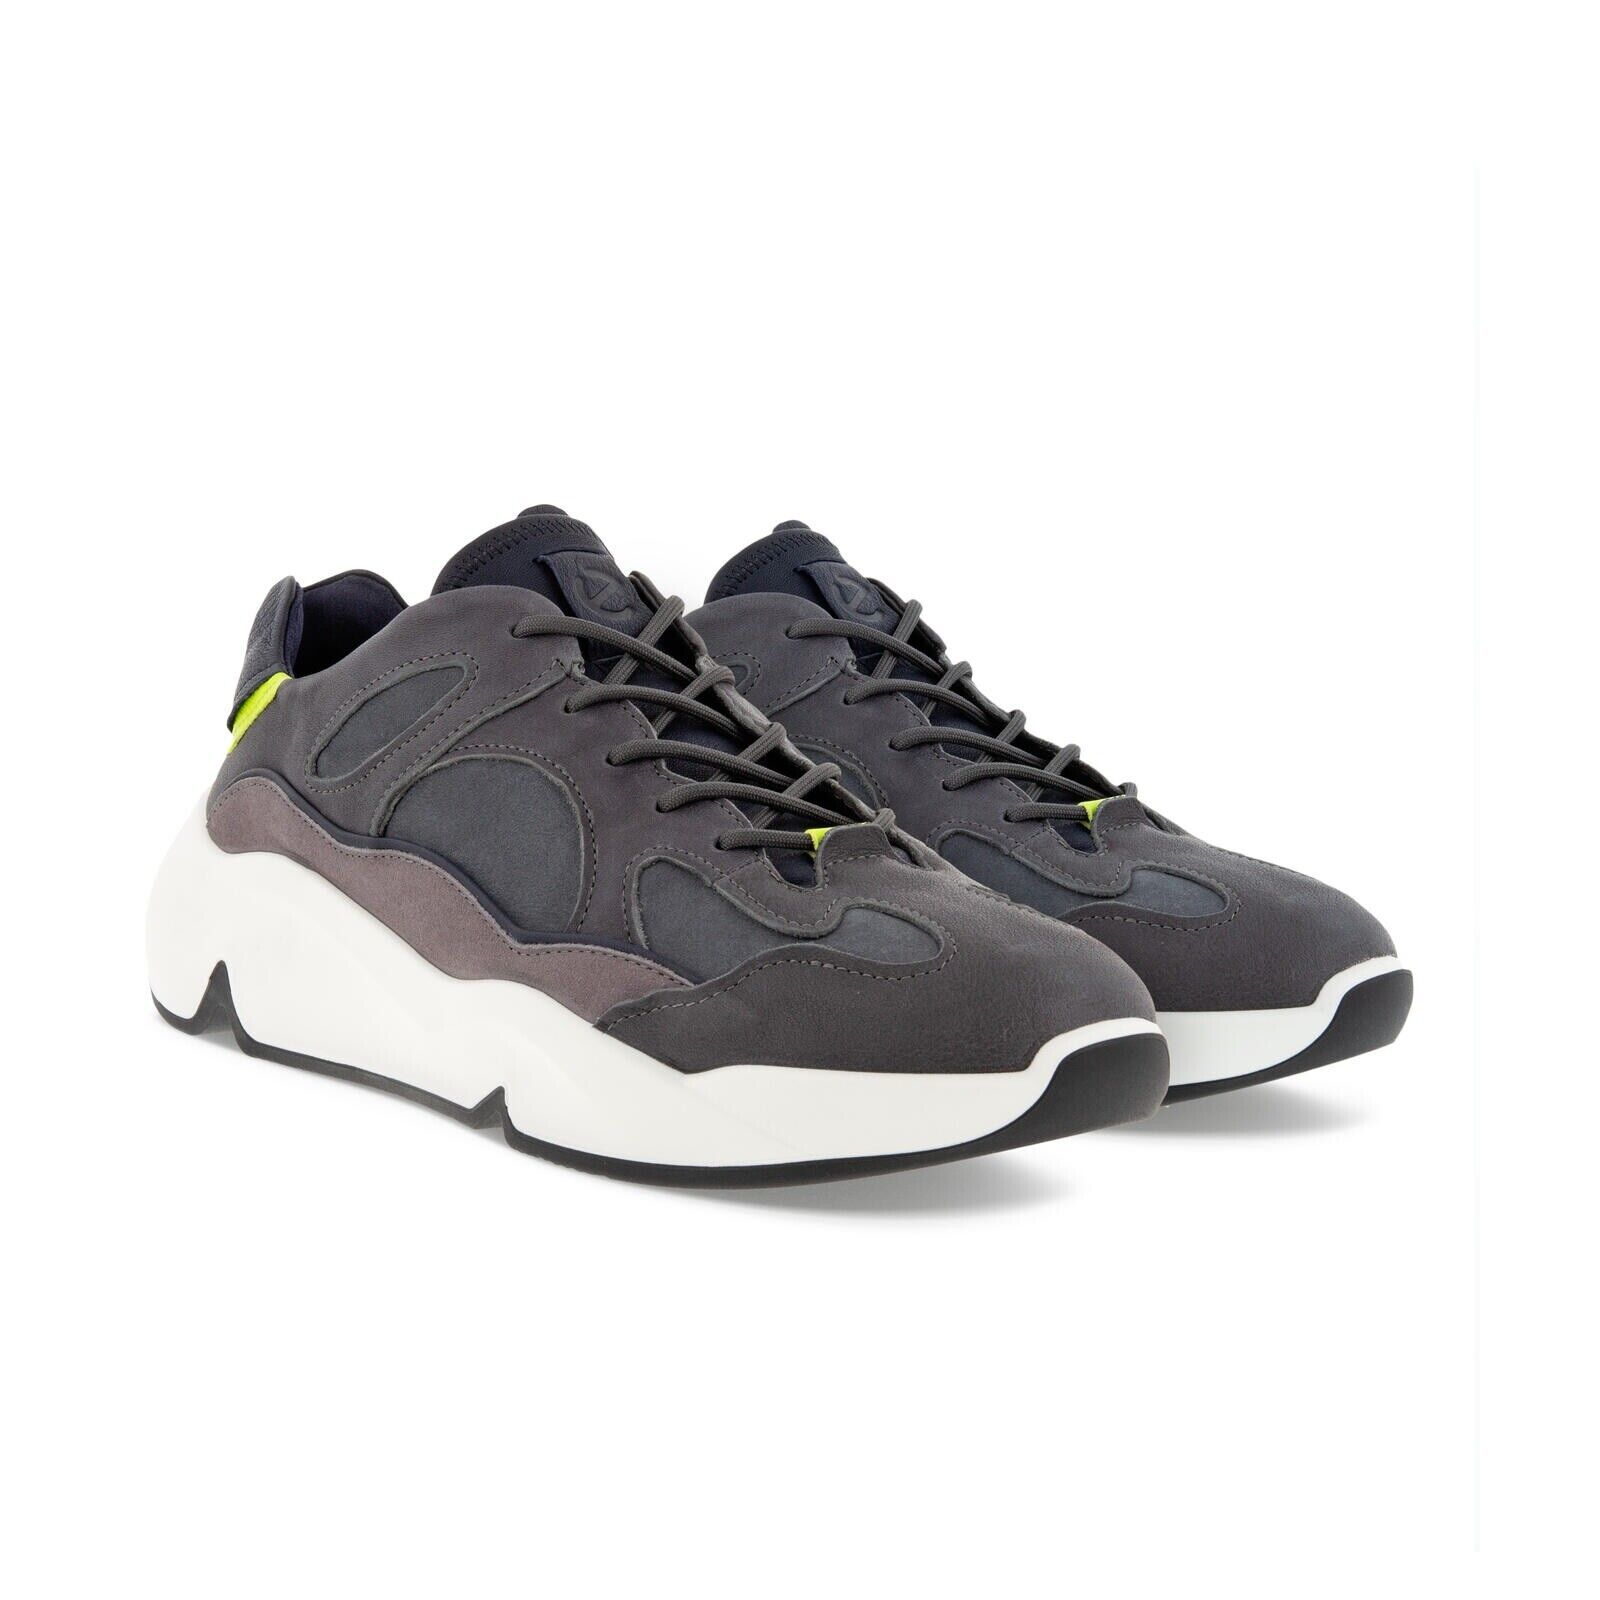 Primary image for Ecco Men's Chunky Color Pop Leather Sneaker Sporty Casual Comfort Shoe Magnet